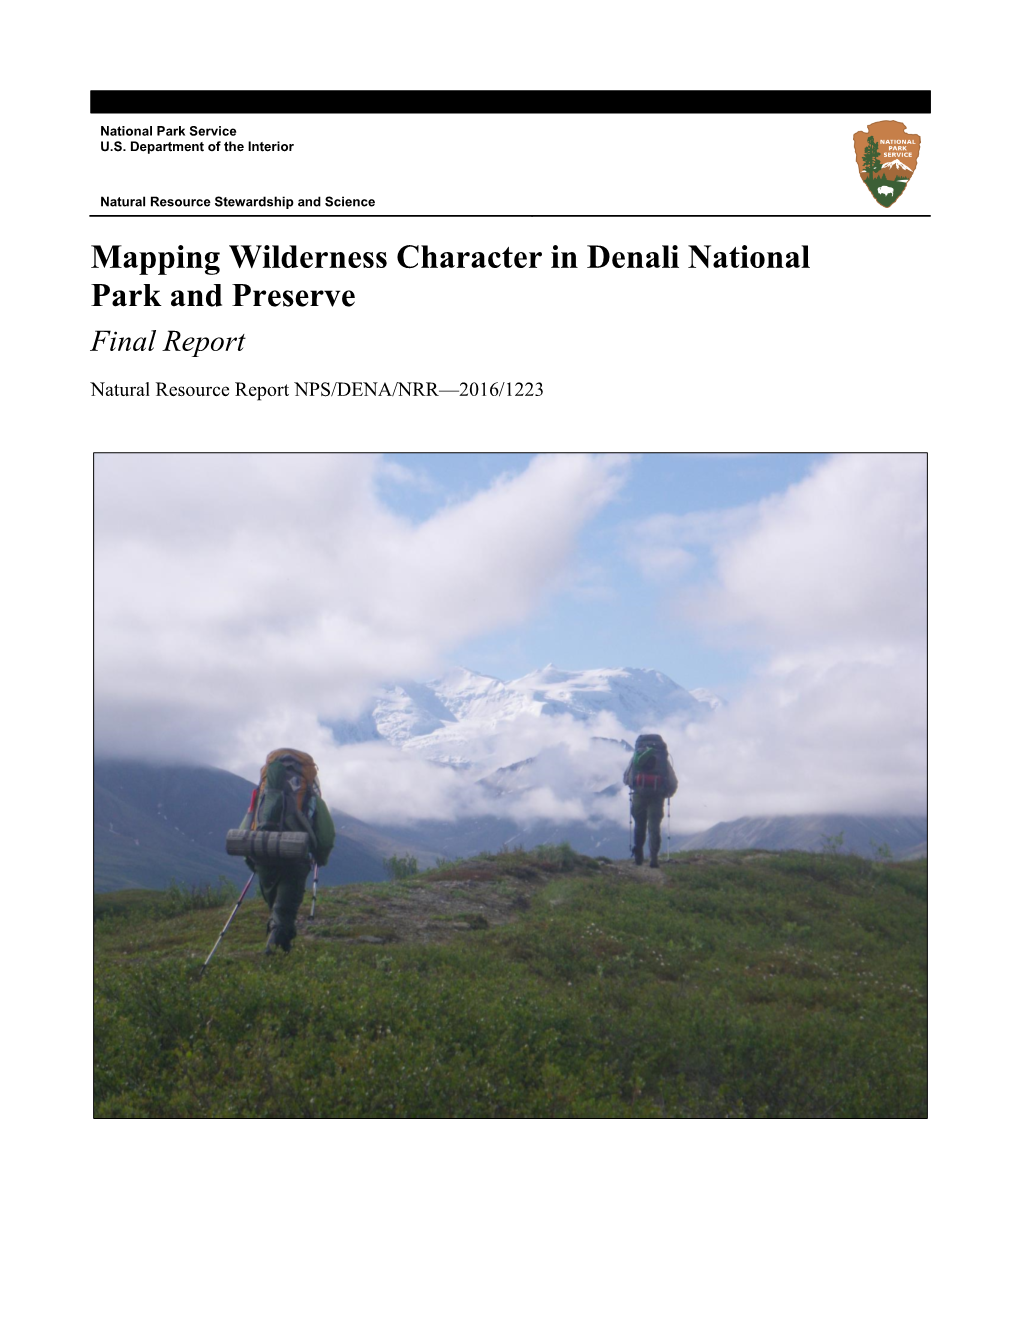 Mapping Wilderness Character in Denali National Park and Preserve Final Report